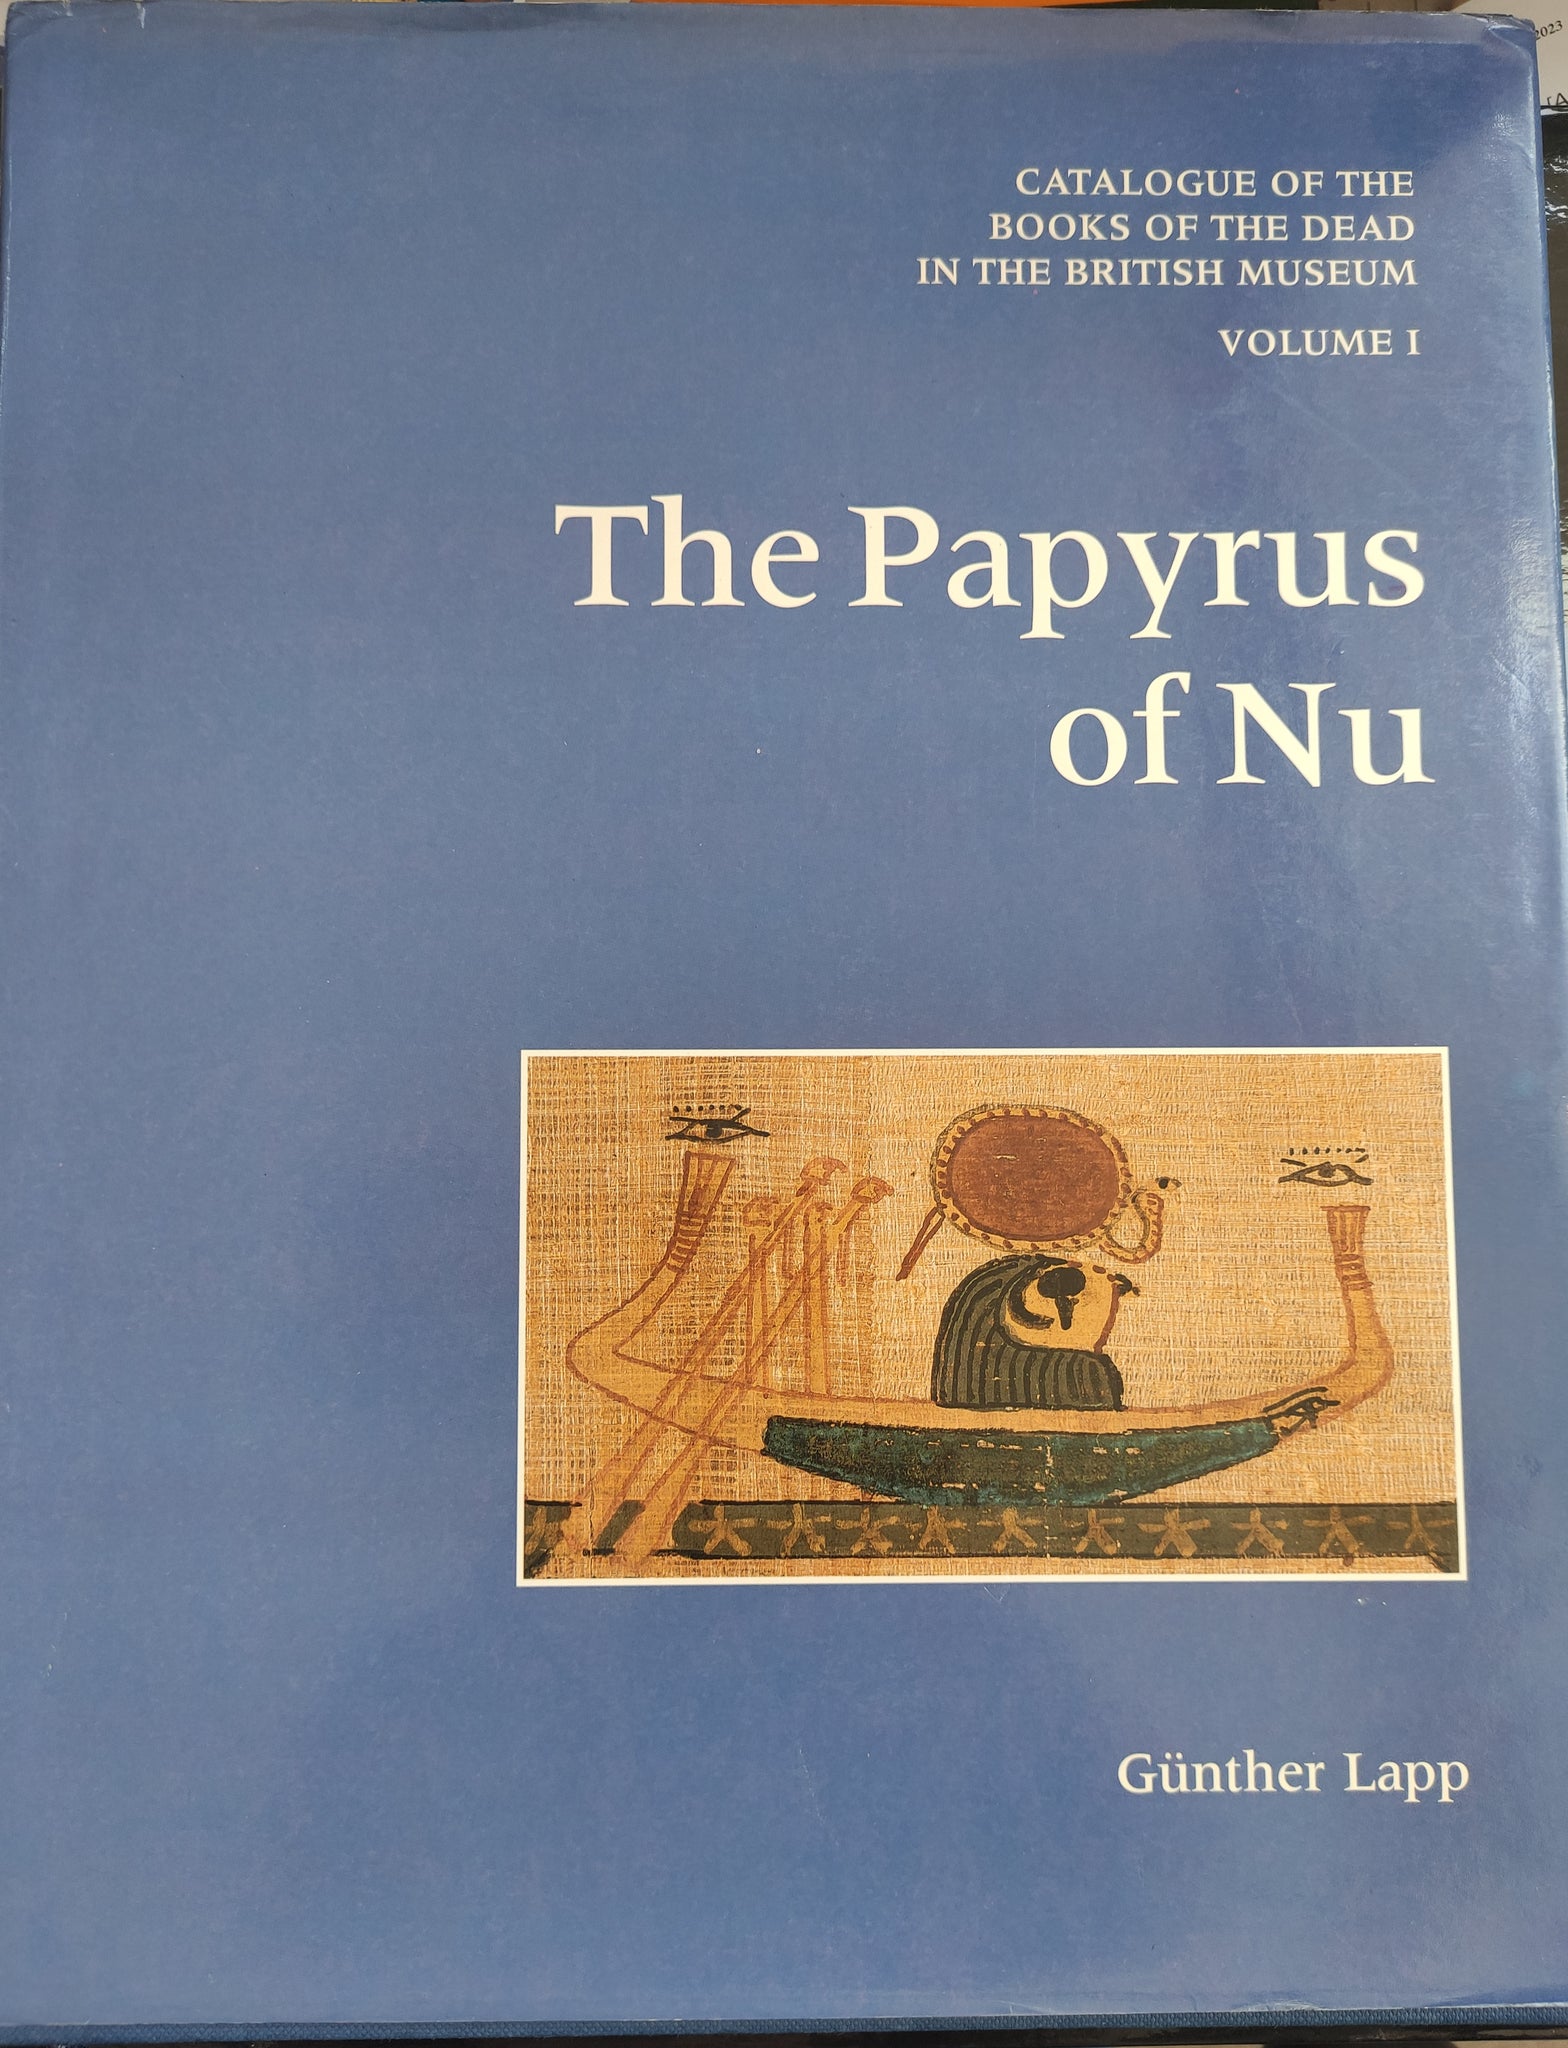 The papyrus of Nu. Catalogue of Books of the Dead in the British Museum, Volume I.